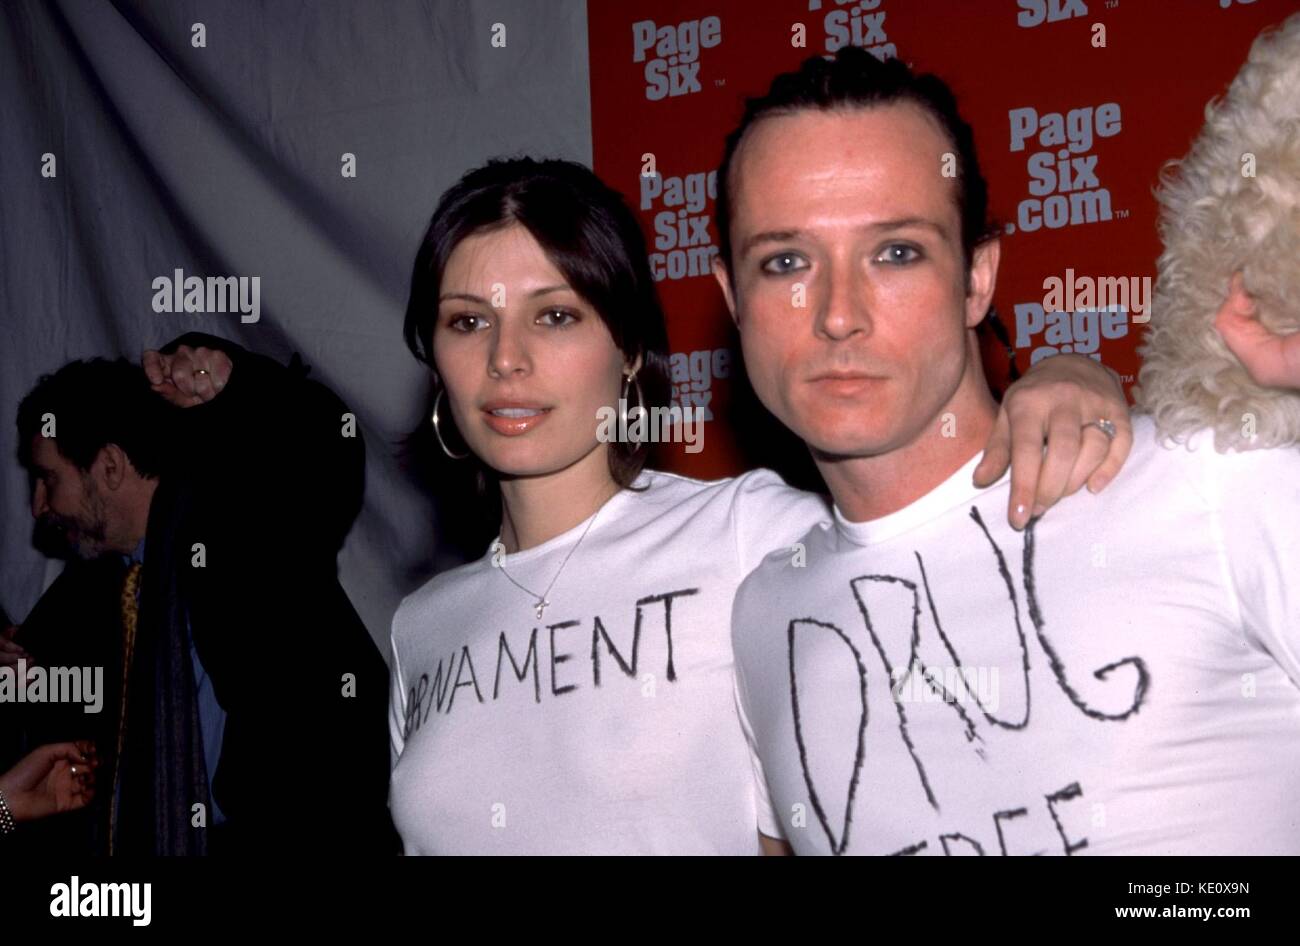 Scott Weiland w/ girlfriend attending The New York Post's 'Page Six.Com' launch party at Gustavino's in New York City. February 9, 2000 © Joseph Marzullo / MediaPunch Stock Photo